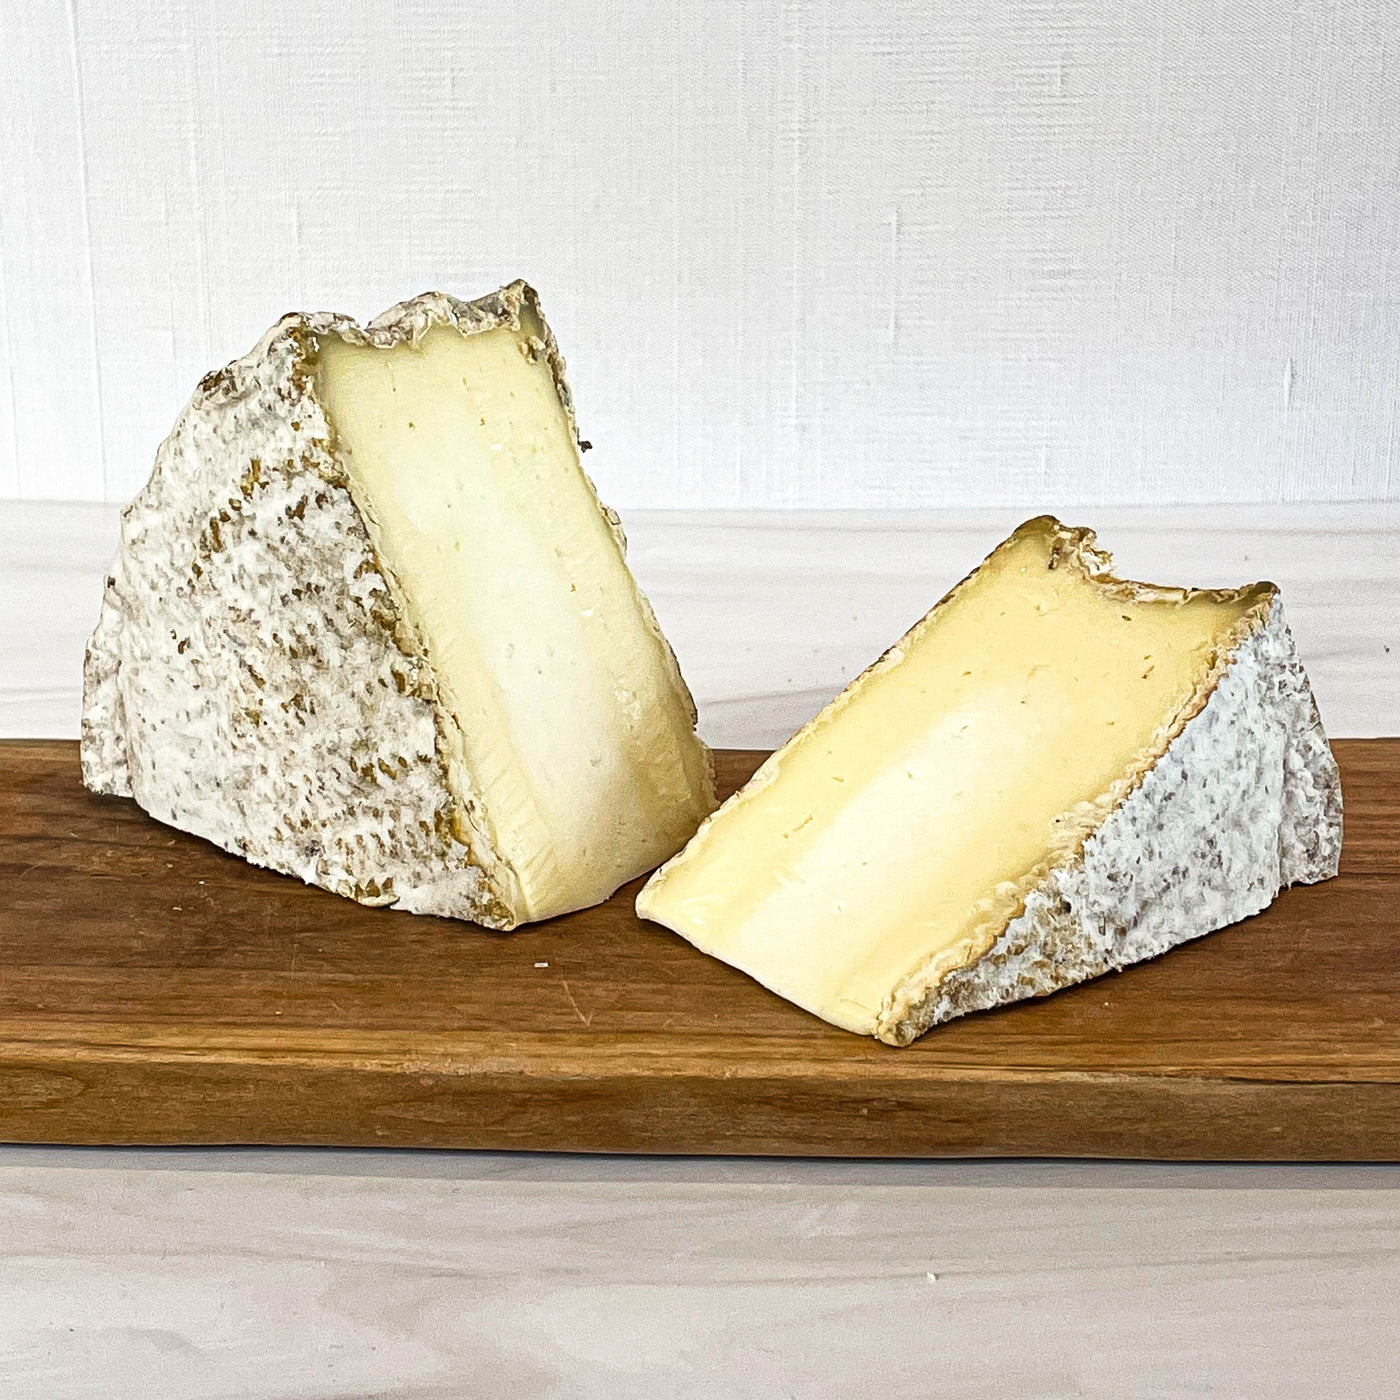 TOMME CRAYEUSE / Schmidhauser Cheese / France / Past. Cow / Semi-Soft | antonellischeese.com